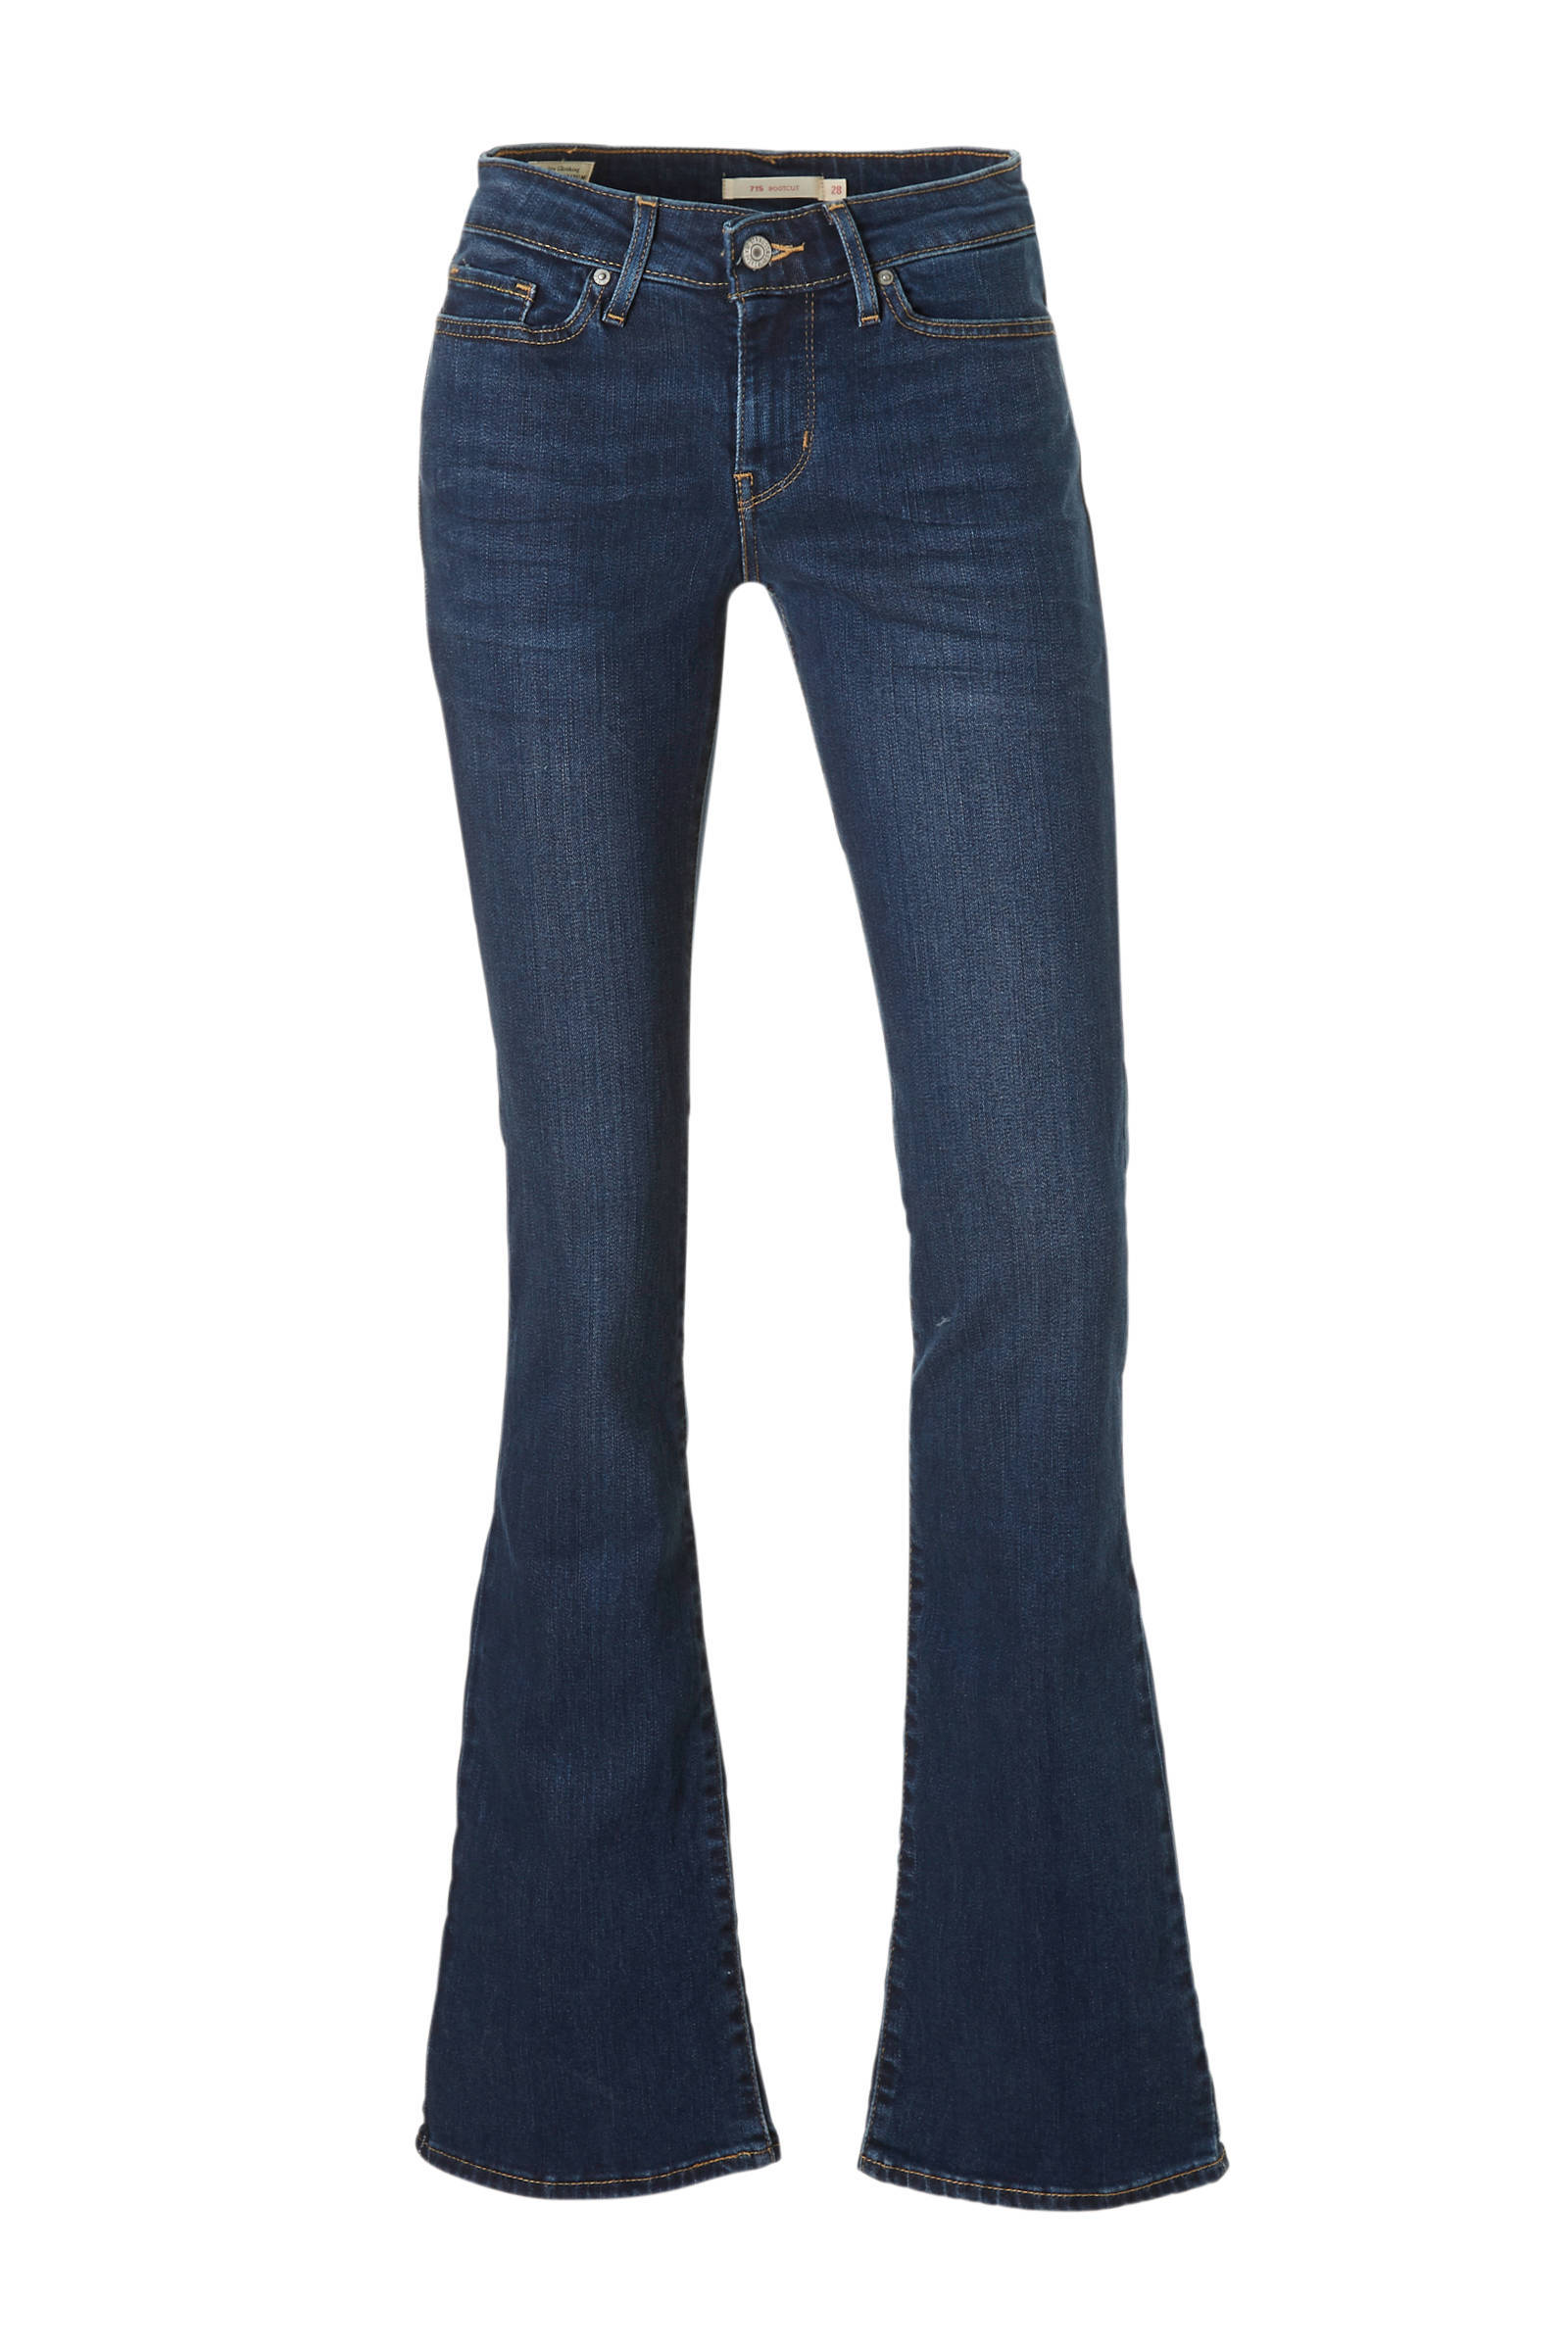 levis flared jeans